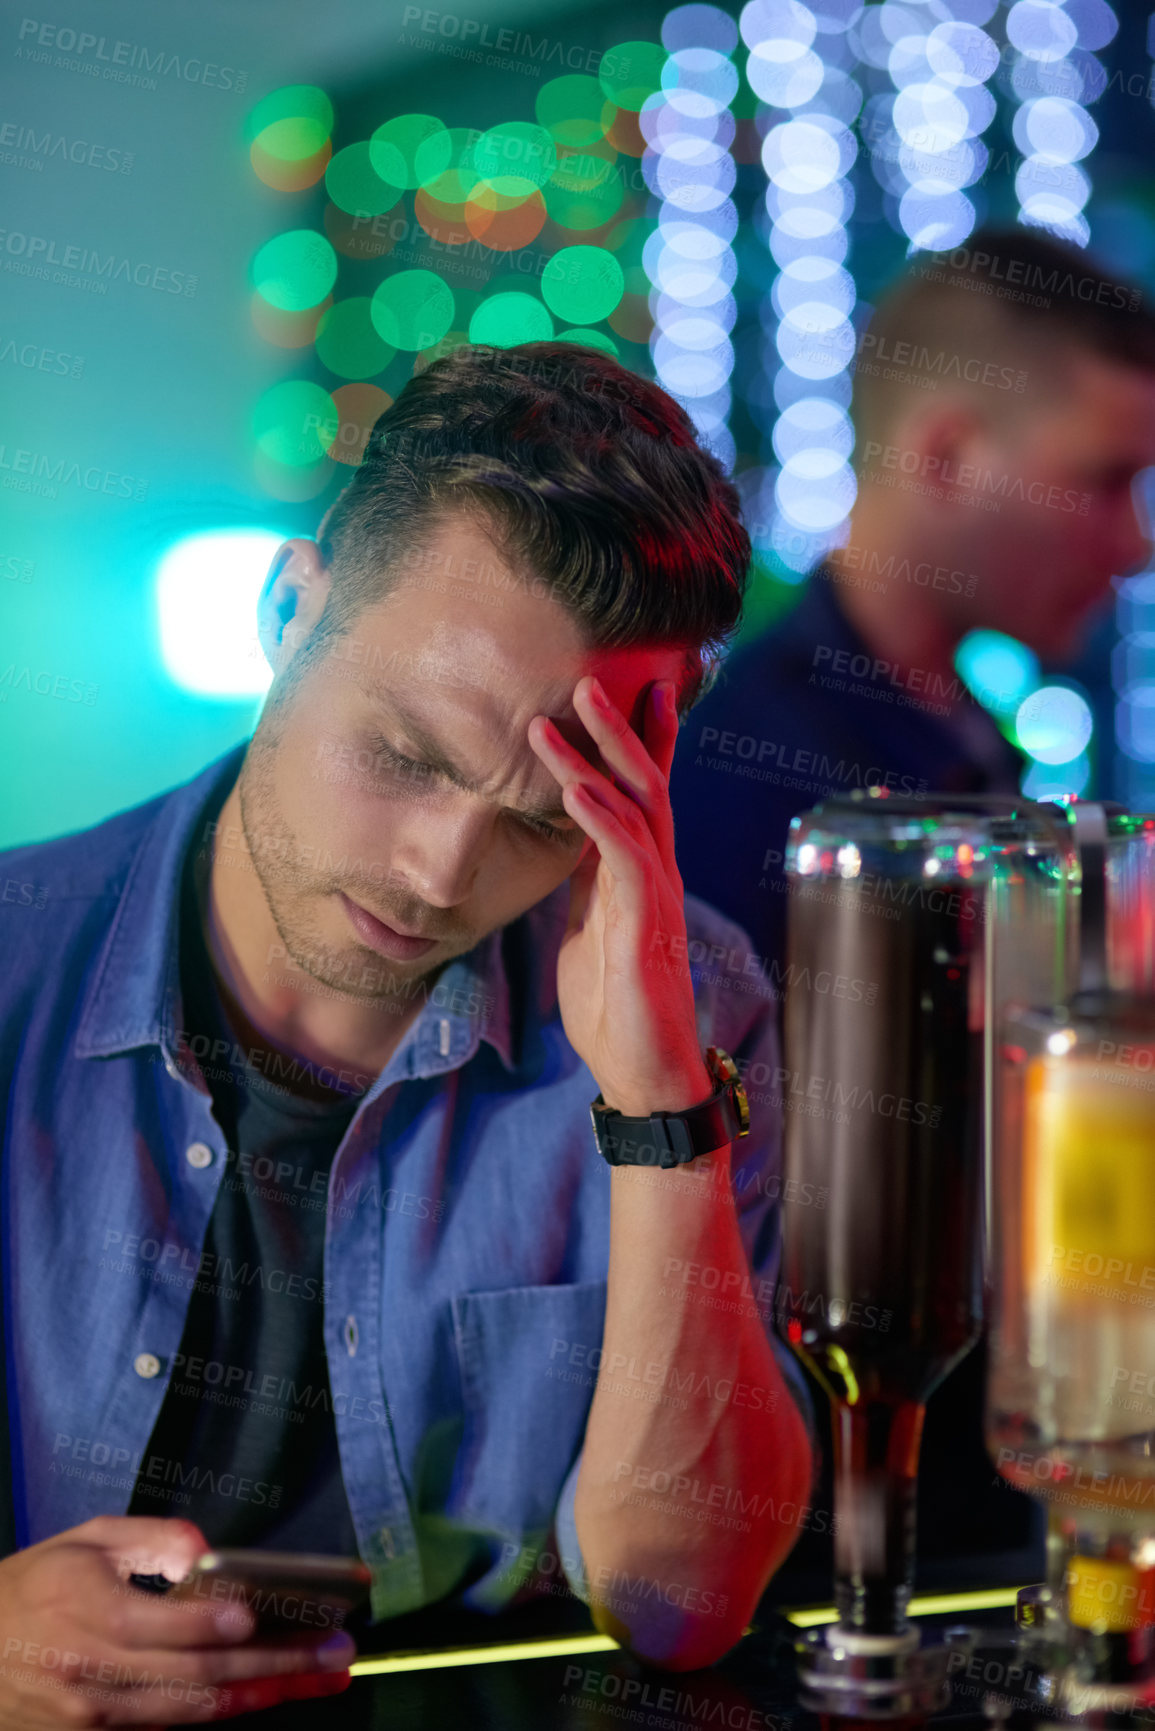 Buy stock photo Shot of an upset looking young man reading a text on his cellphone while sitting at the counter of a nightclub